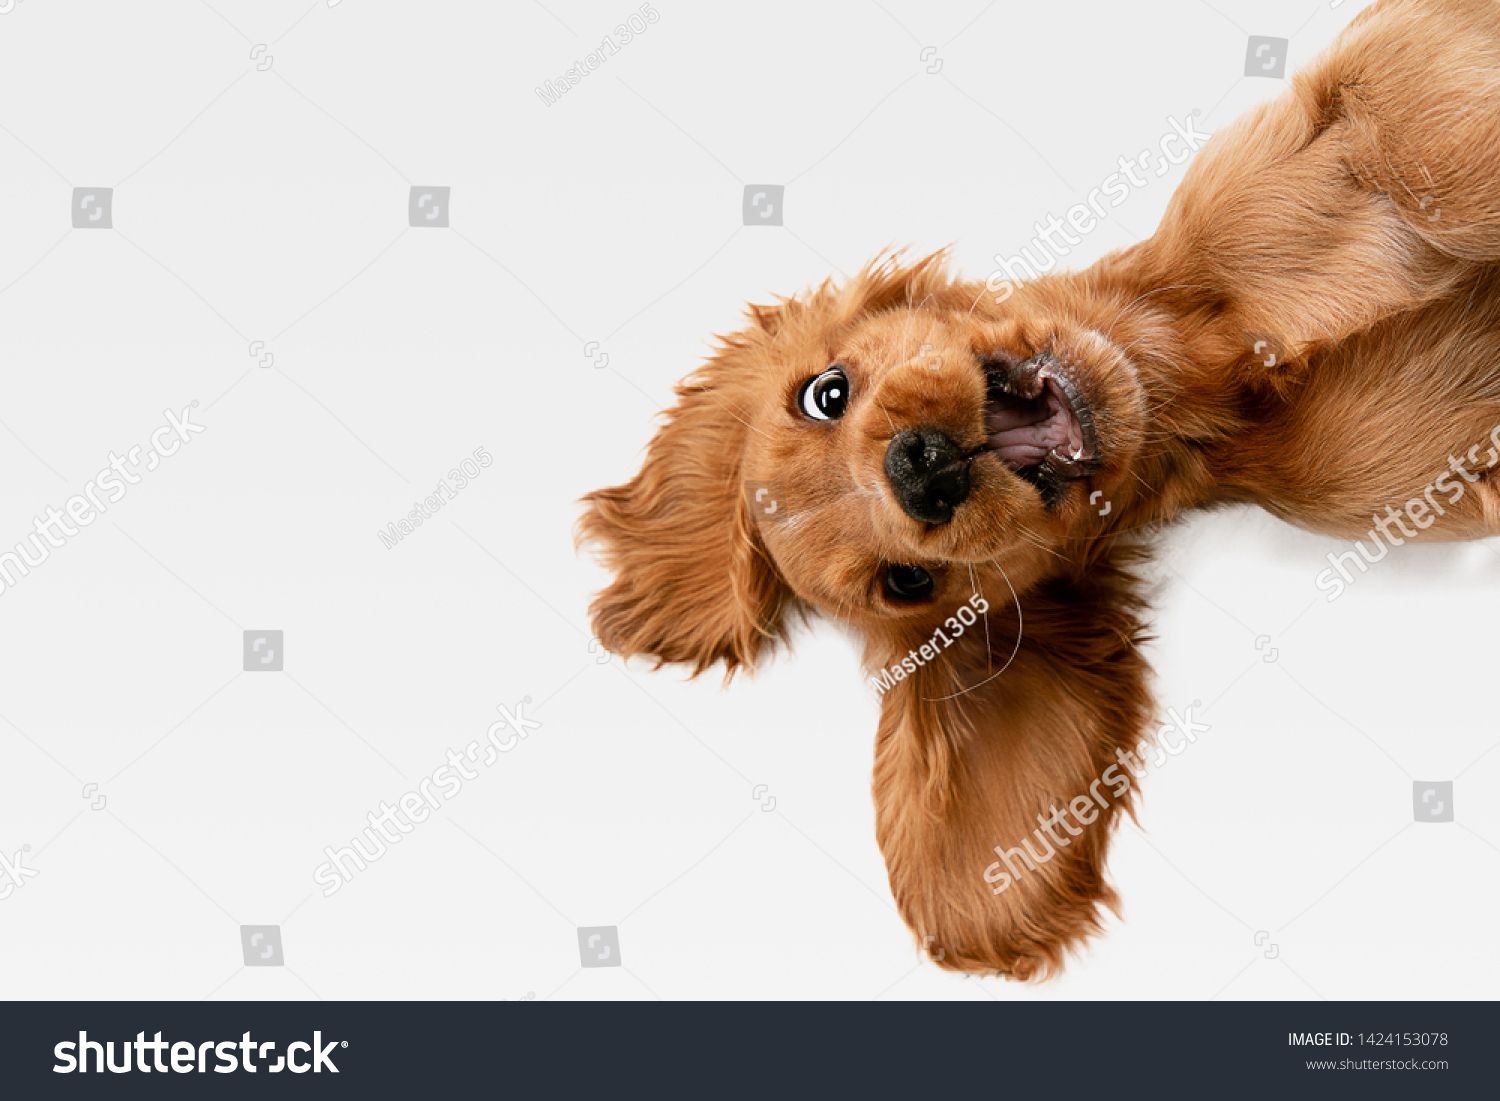 Pure youth crazy. English cocker spaniel young dog is posing. Cute playful white-braun doggy or pet is playing and looking happy isolated on white background. Concept of motion, action, movement. #1424153078